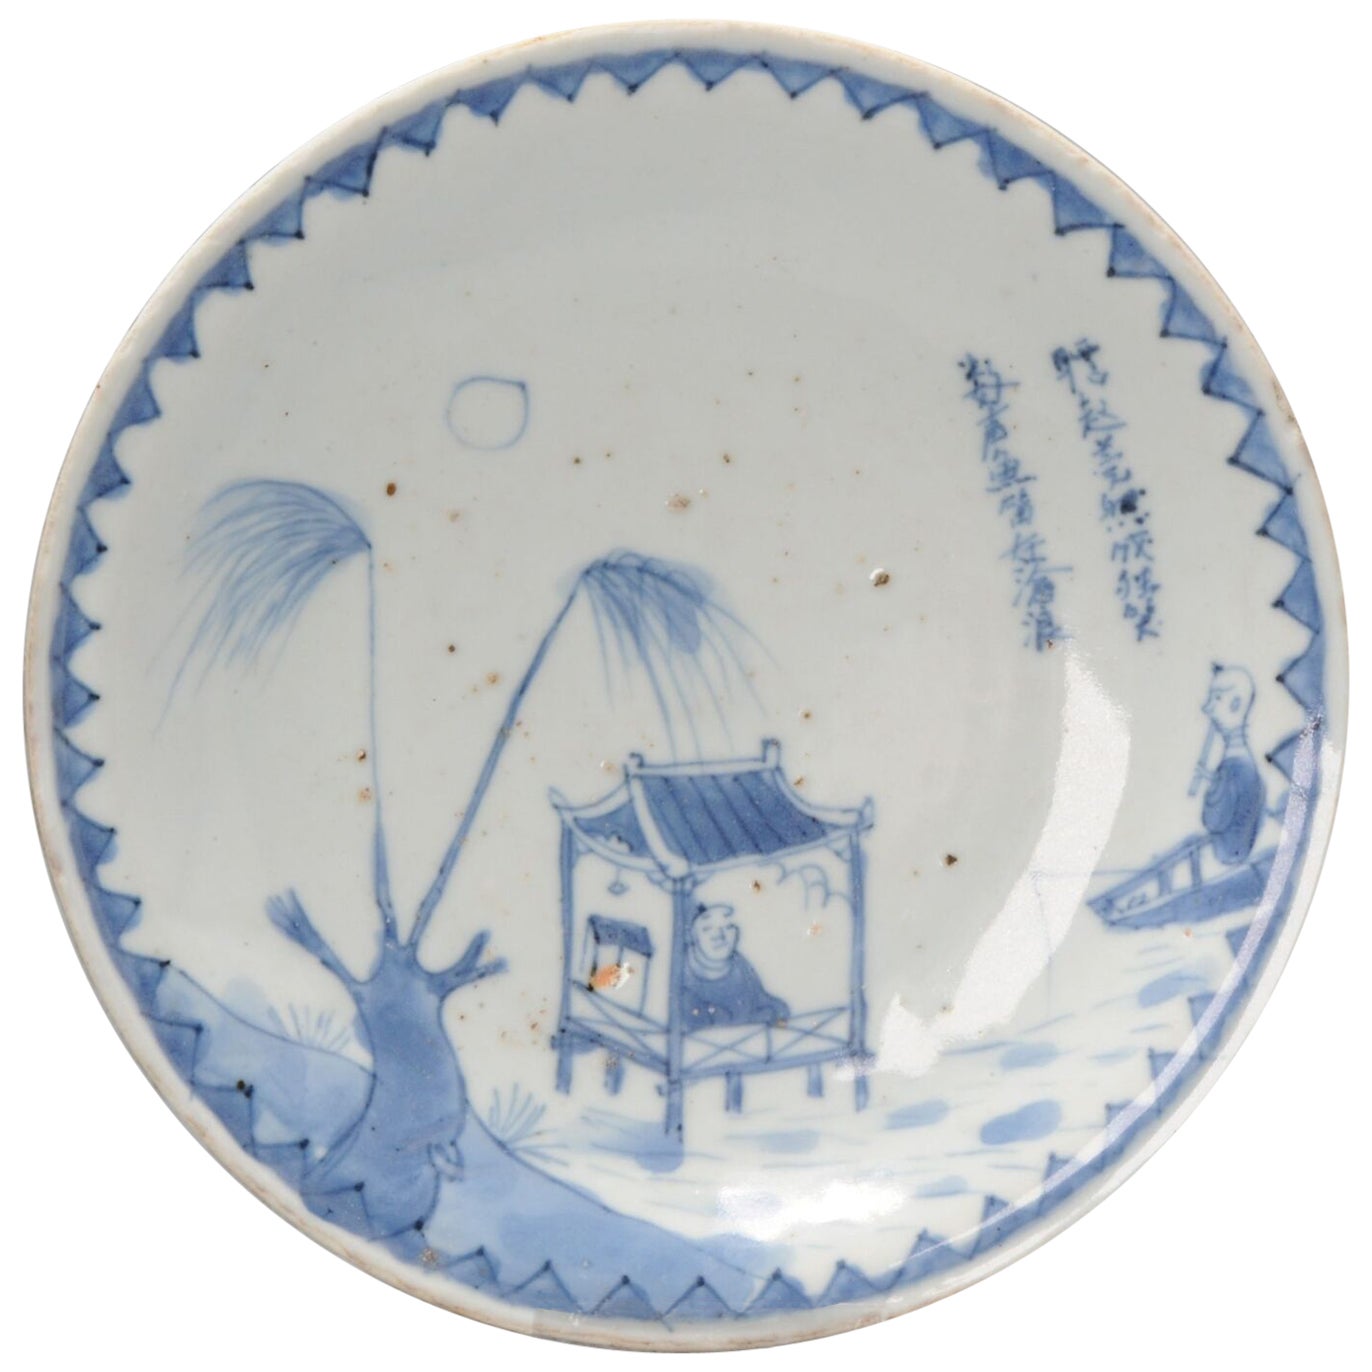 Rare Chinese Porcelain Ming Period Kosometsuke Plates Boat & Fisher, ca1600-1660 For Sale